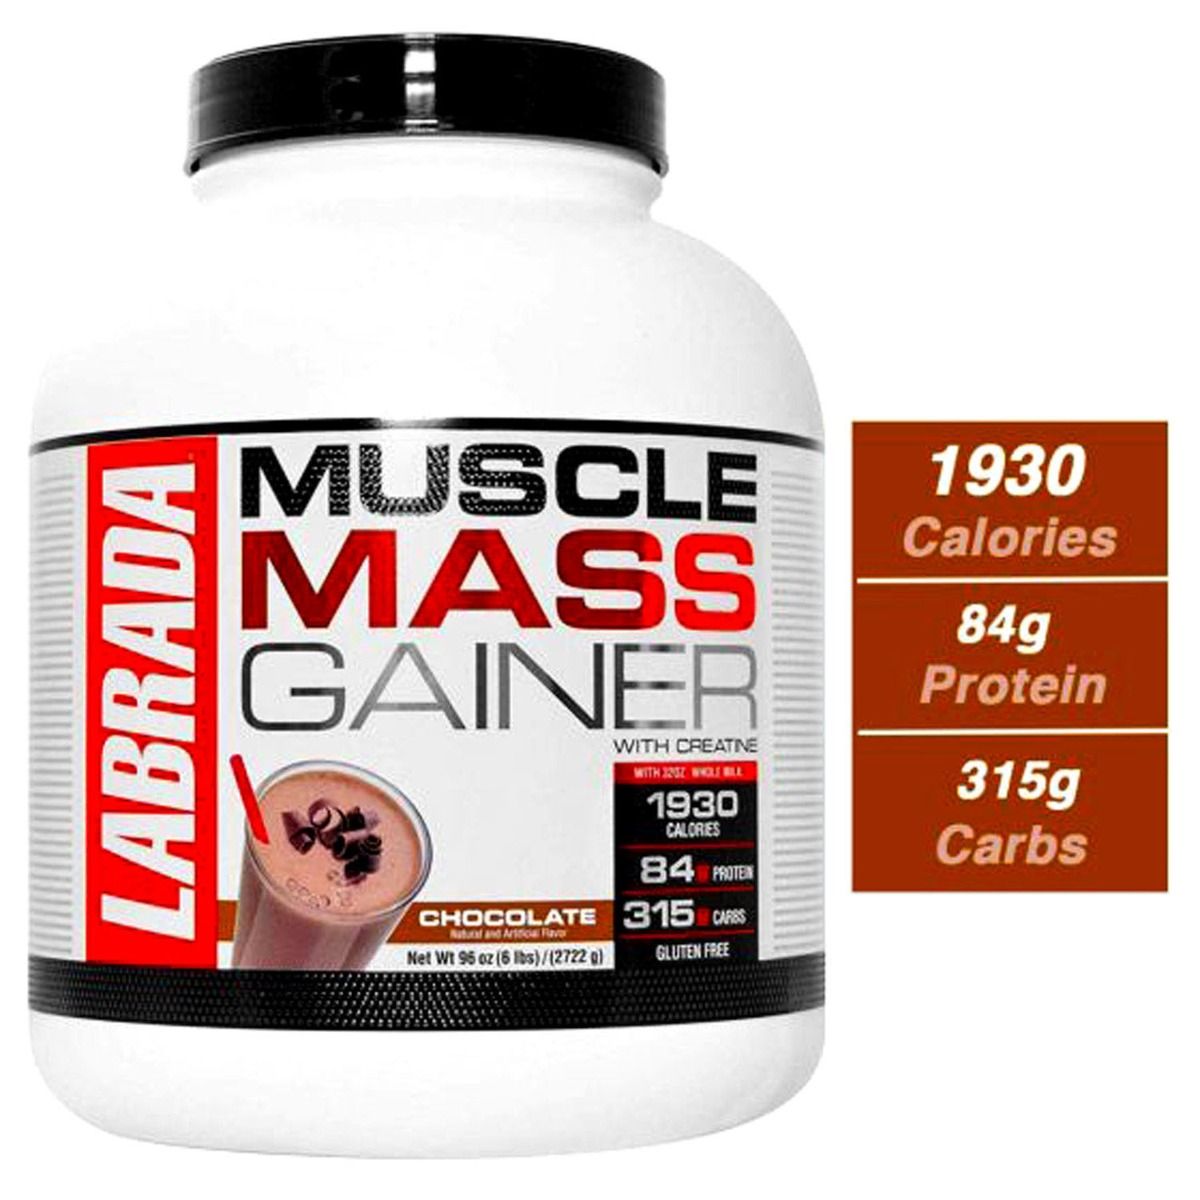 Buy Labrada Muscle Mass Gainer Chocolate 6 lb Online